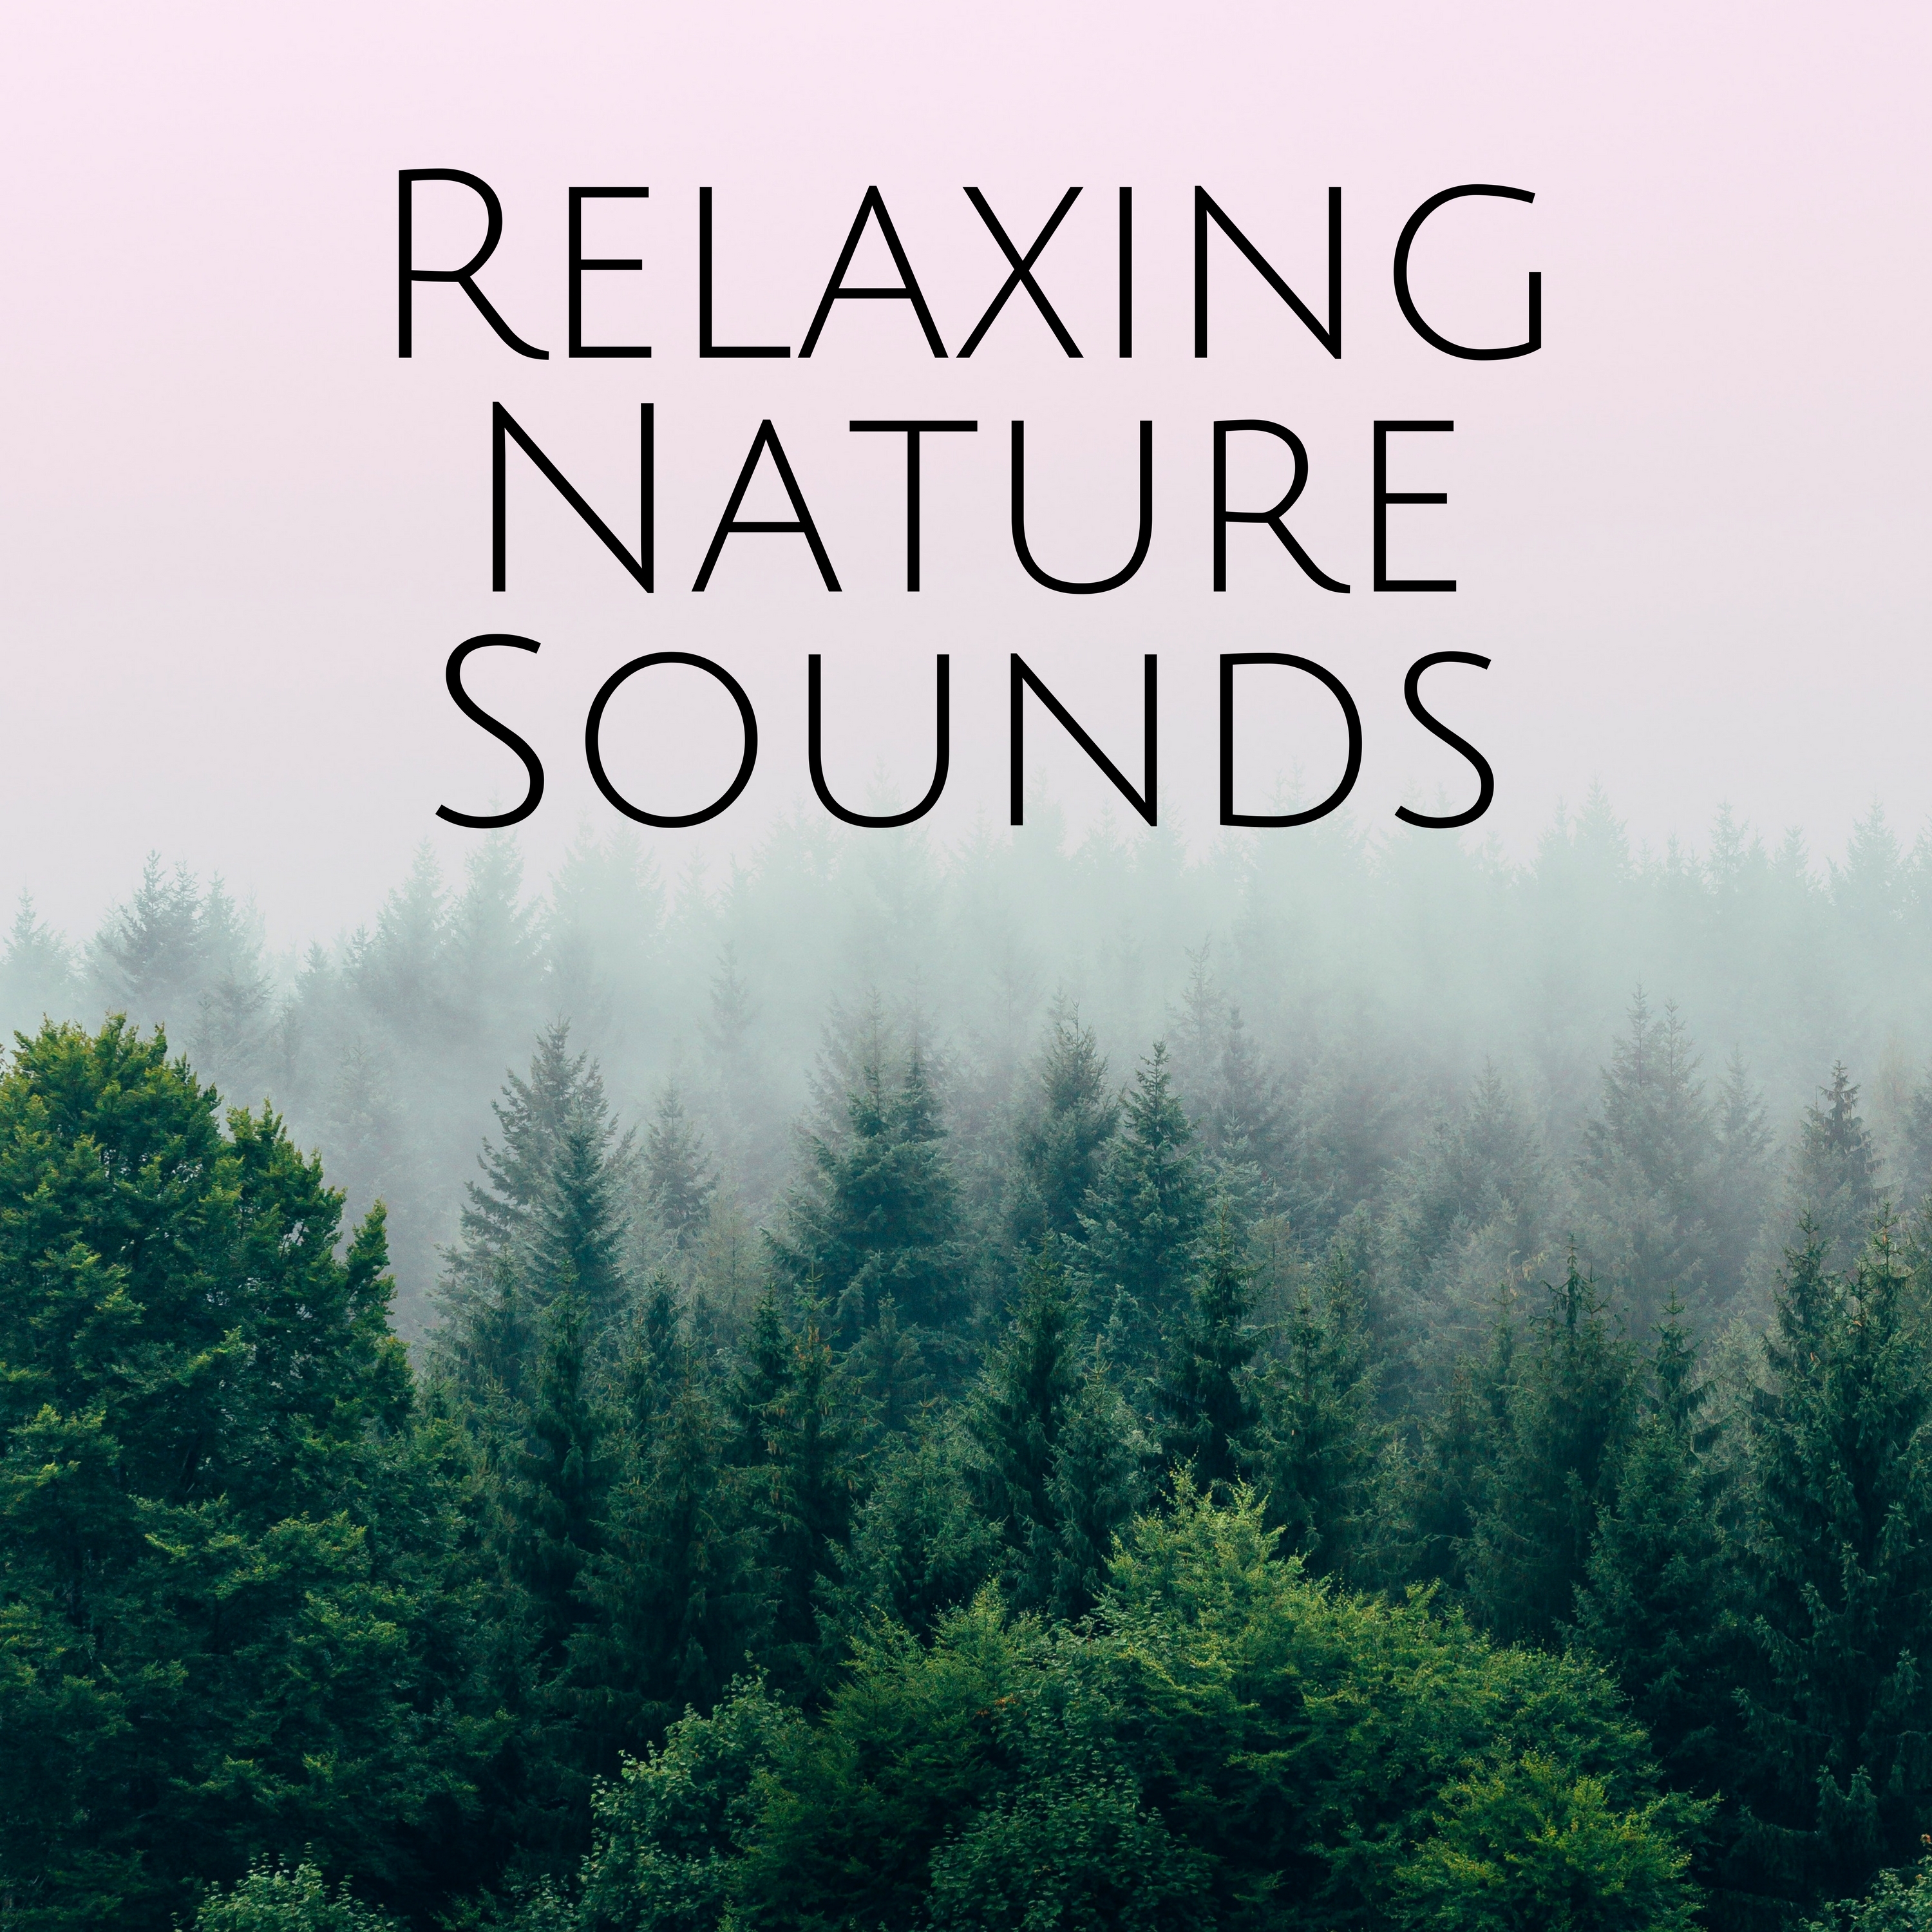 Relaxing Nature Sounds: Relaxation Study Time, Help to Sleep, Power to Calm Down